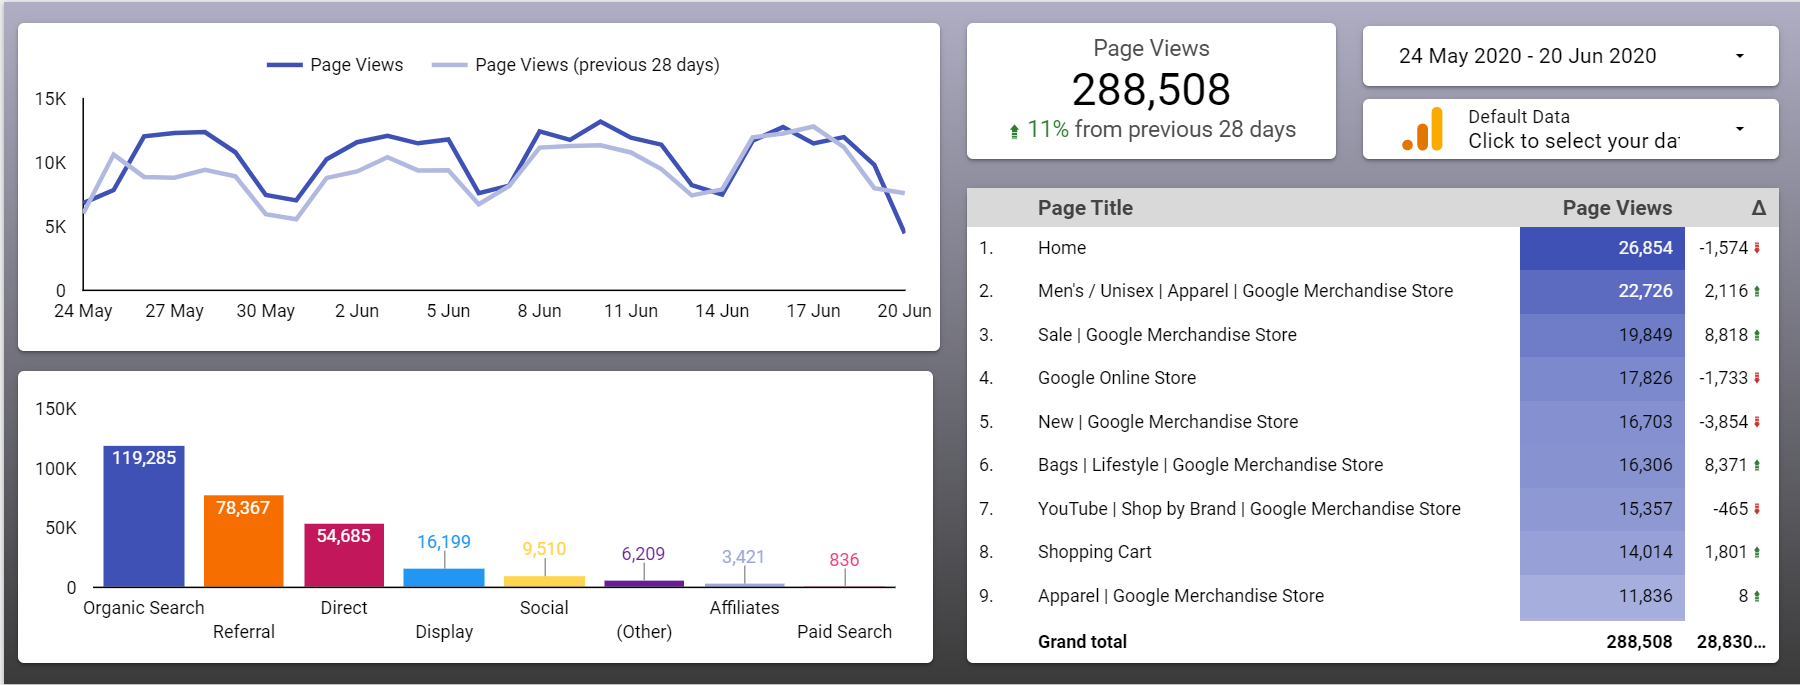 Compact-Google-Analytics-Page-View-Report.png